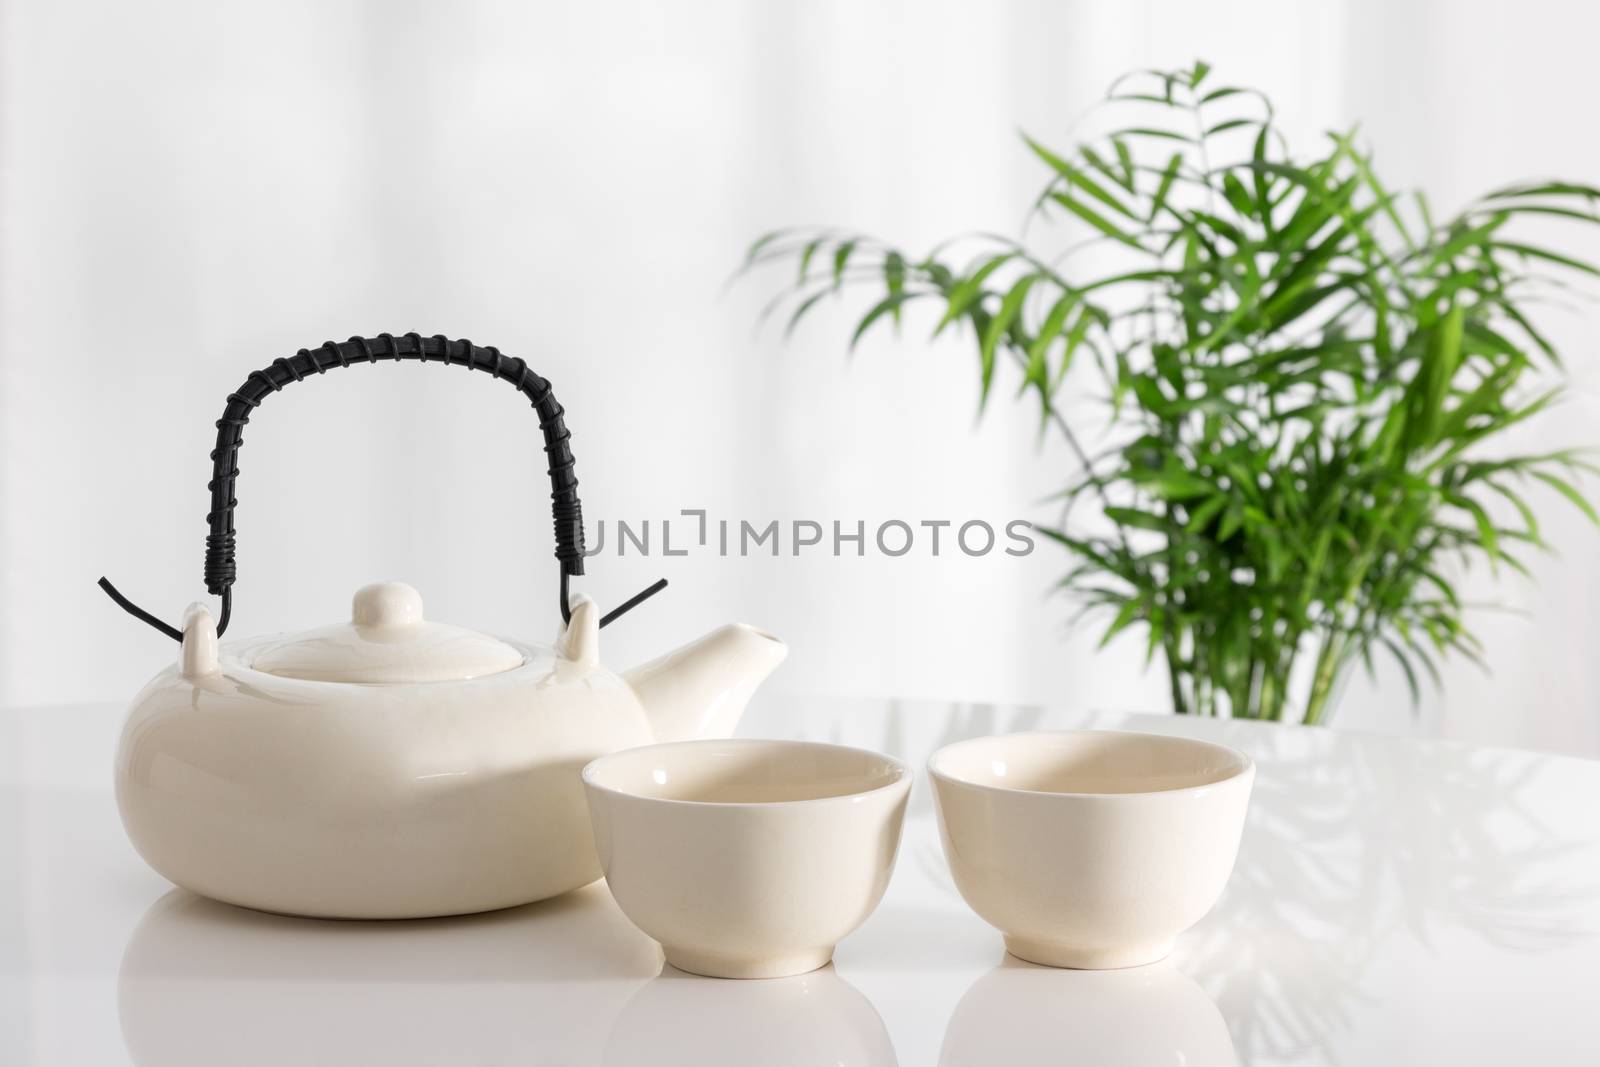 White ceramic teapot and cups on the table, with green plant in the background.